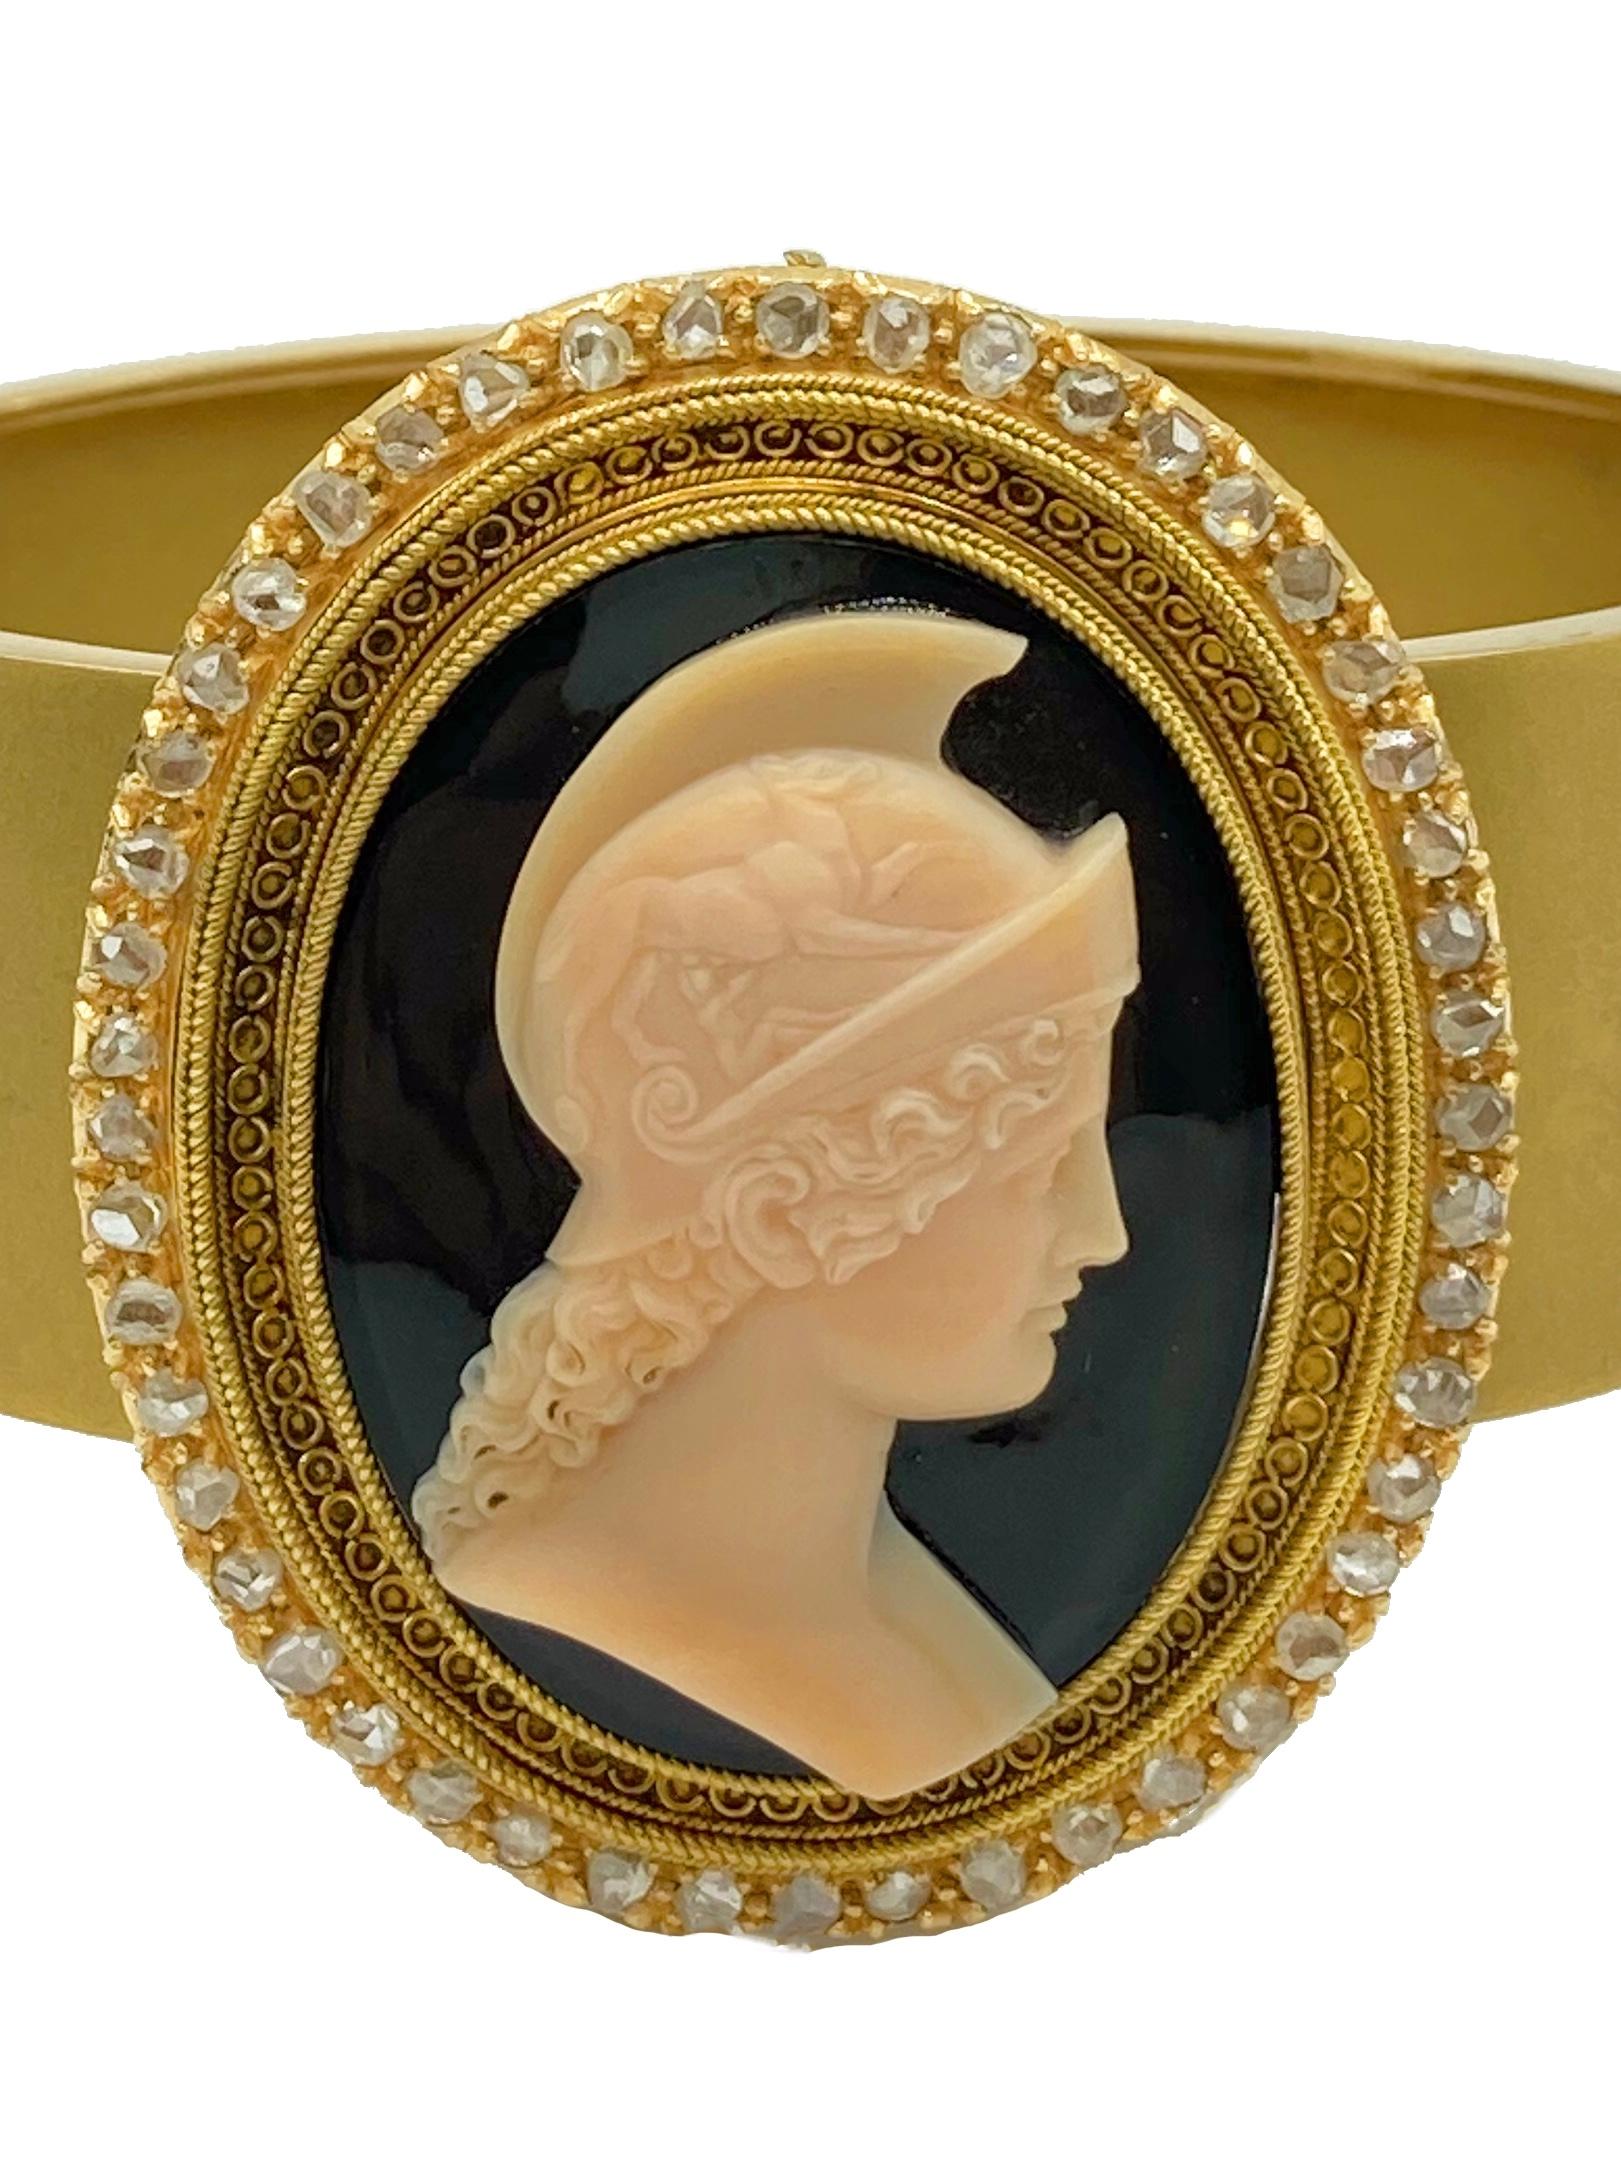 An antique onyx cameo, encircled by rose cut diamonds, mounted on a yellow gold cuff bracelet.